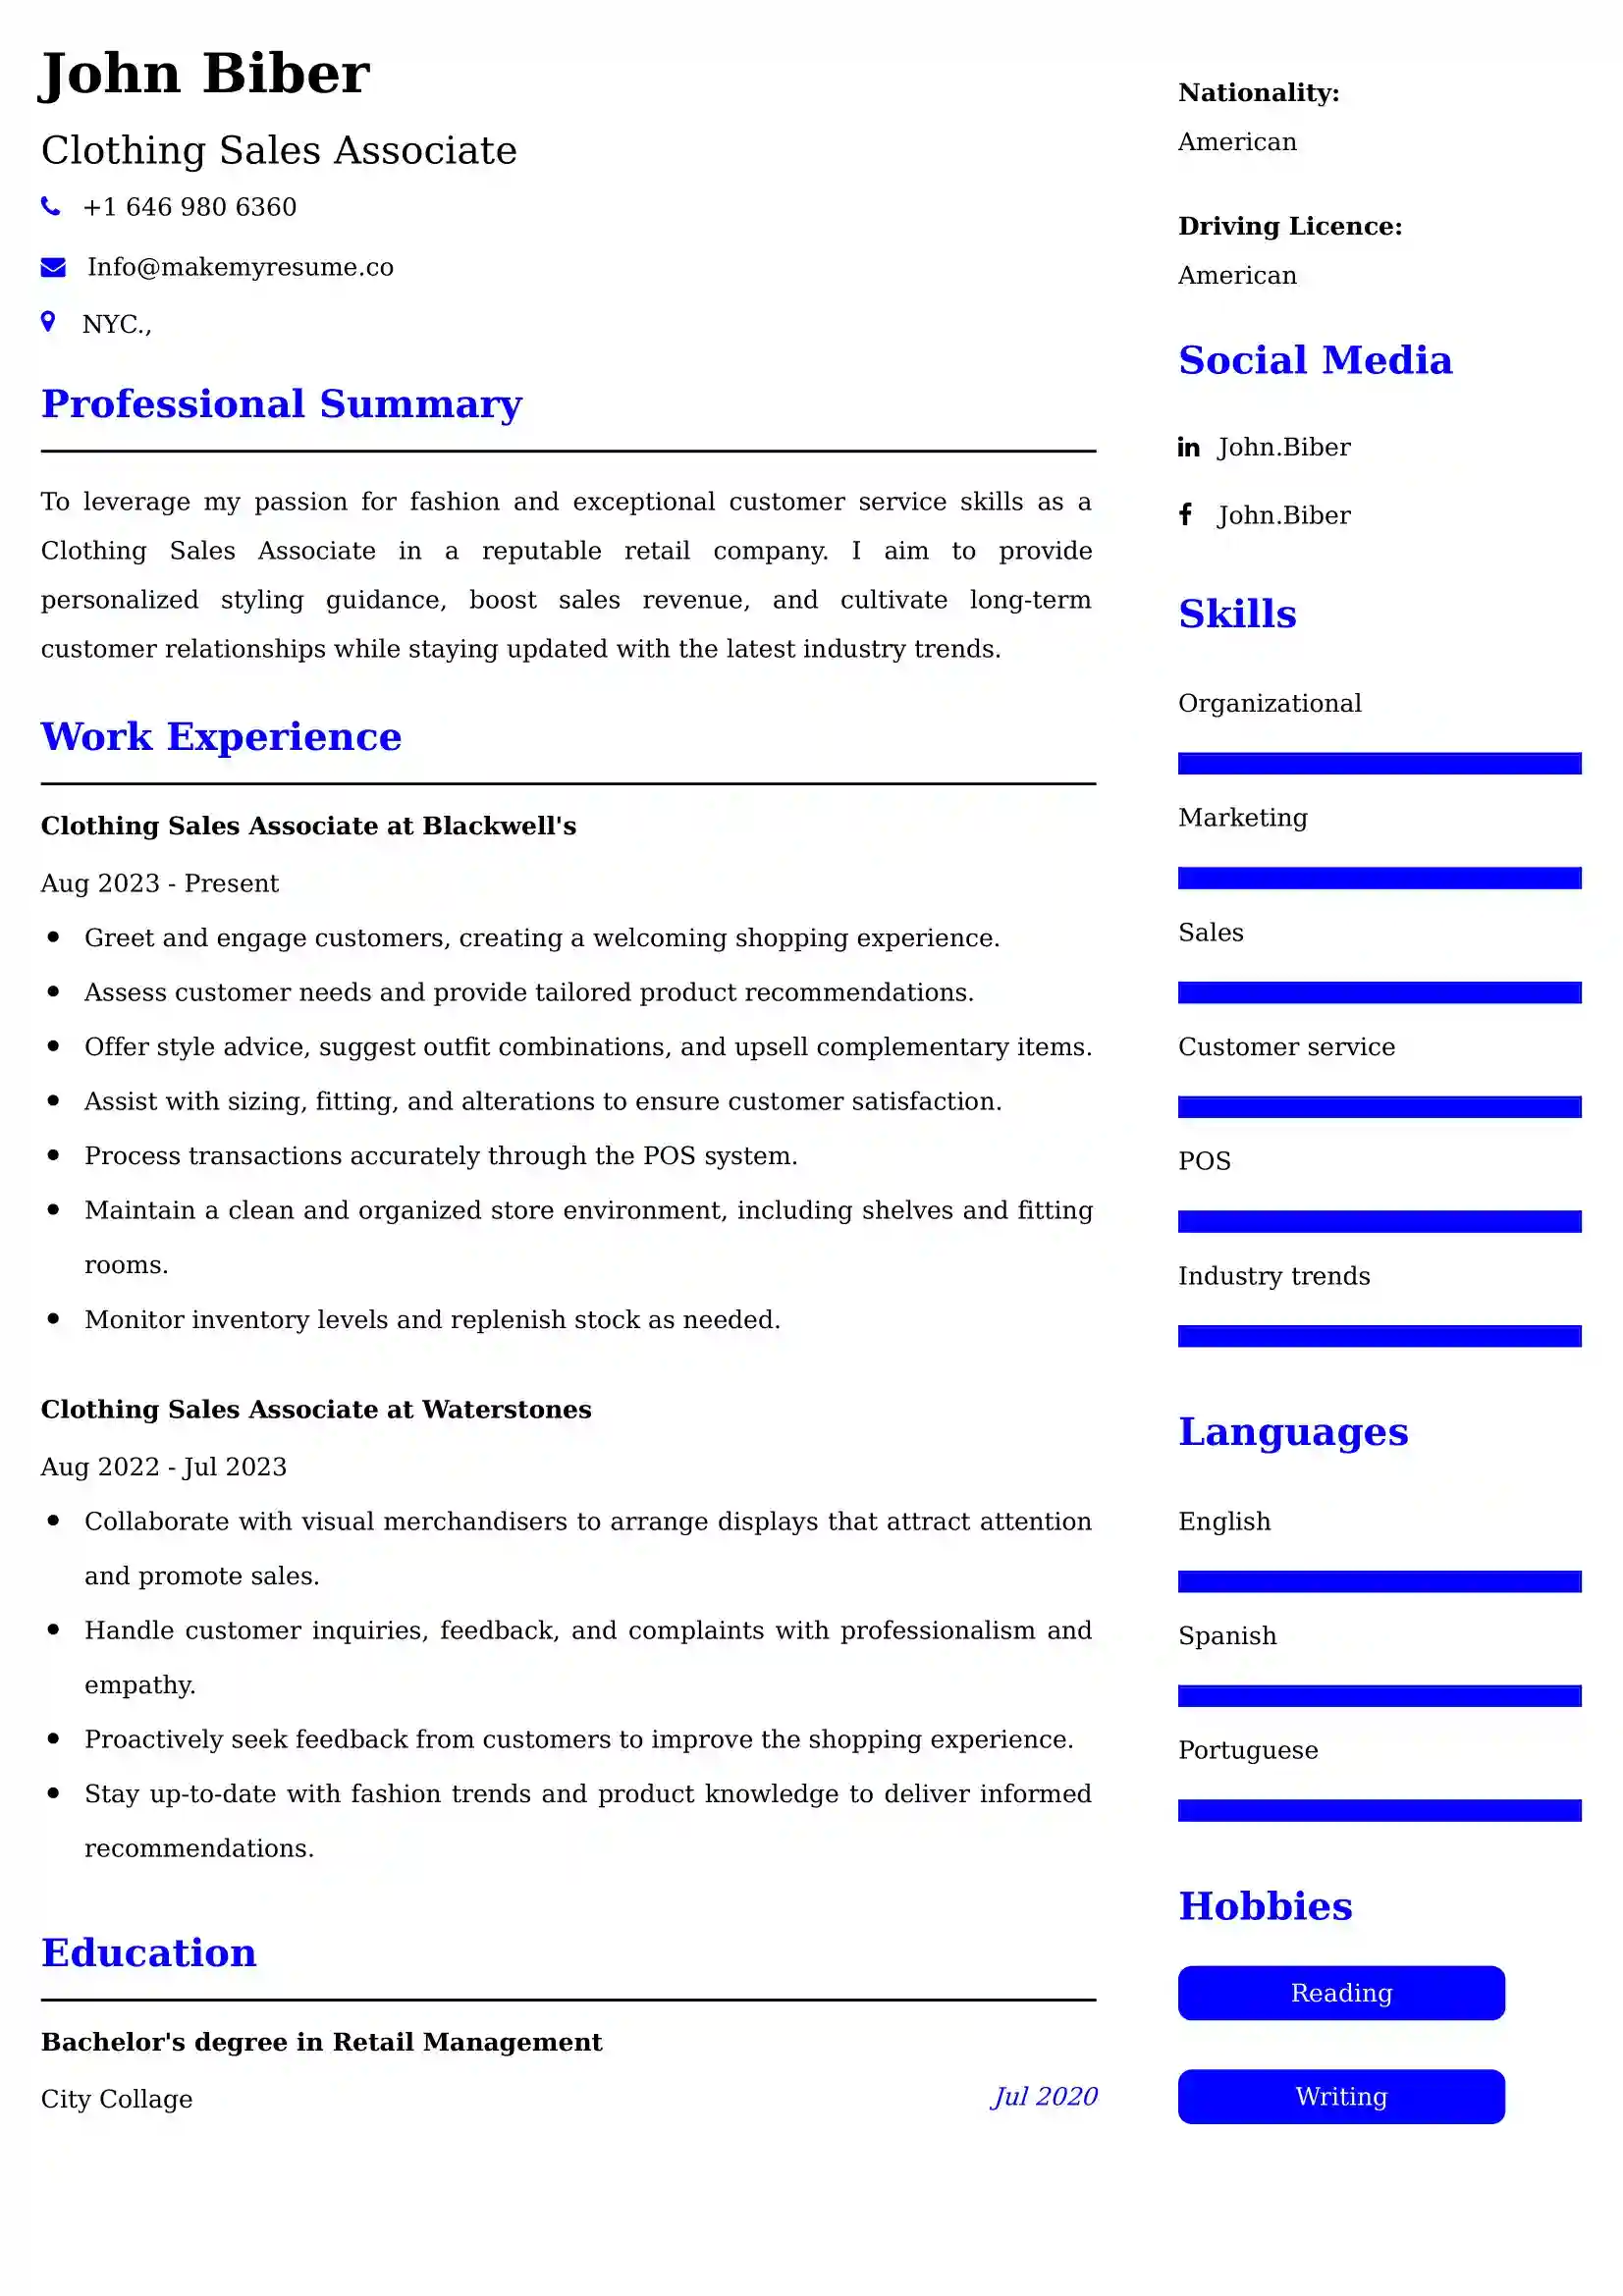 Clothing Sales Associate Resume Examples - UK Format, Latest Template.